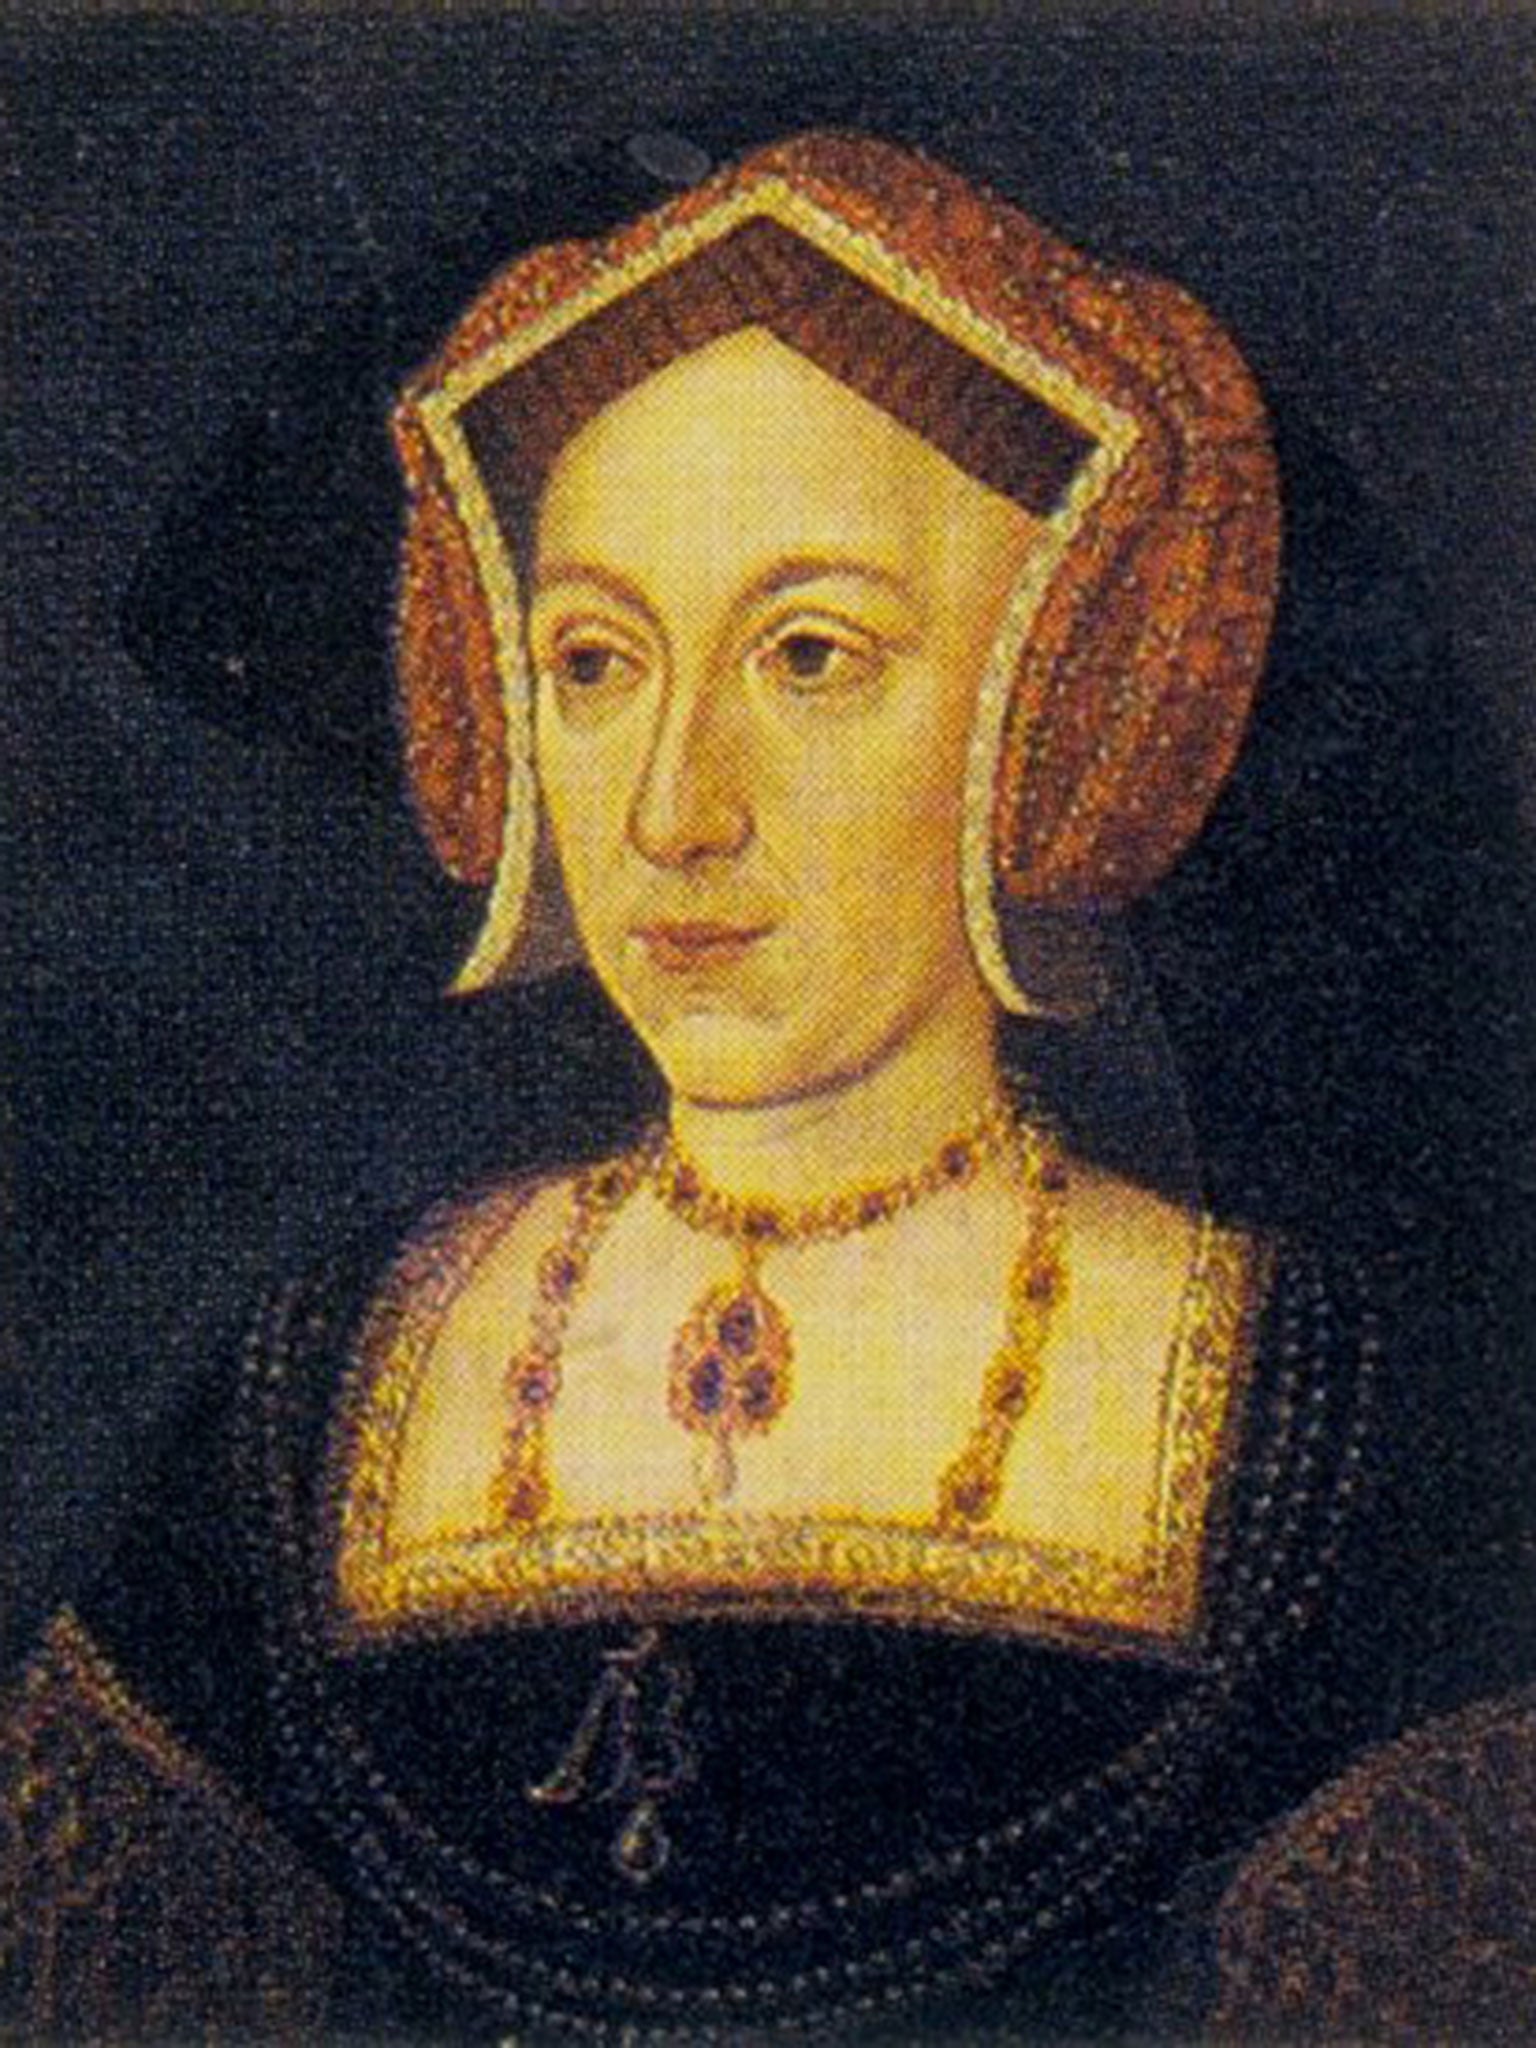 The portrait was compared to the image of Anne Boleyn on a medal at the British Museum